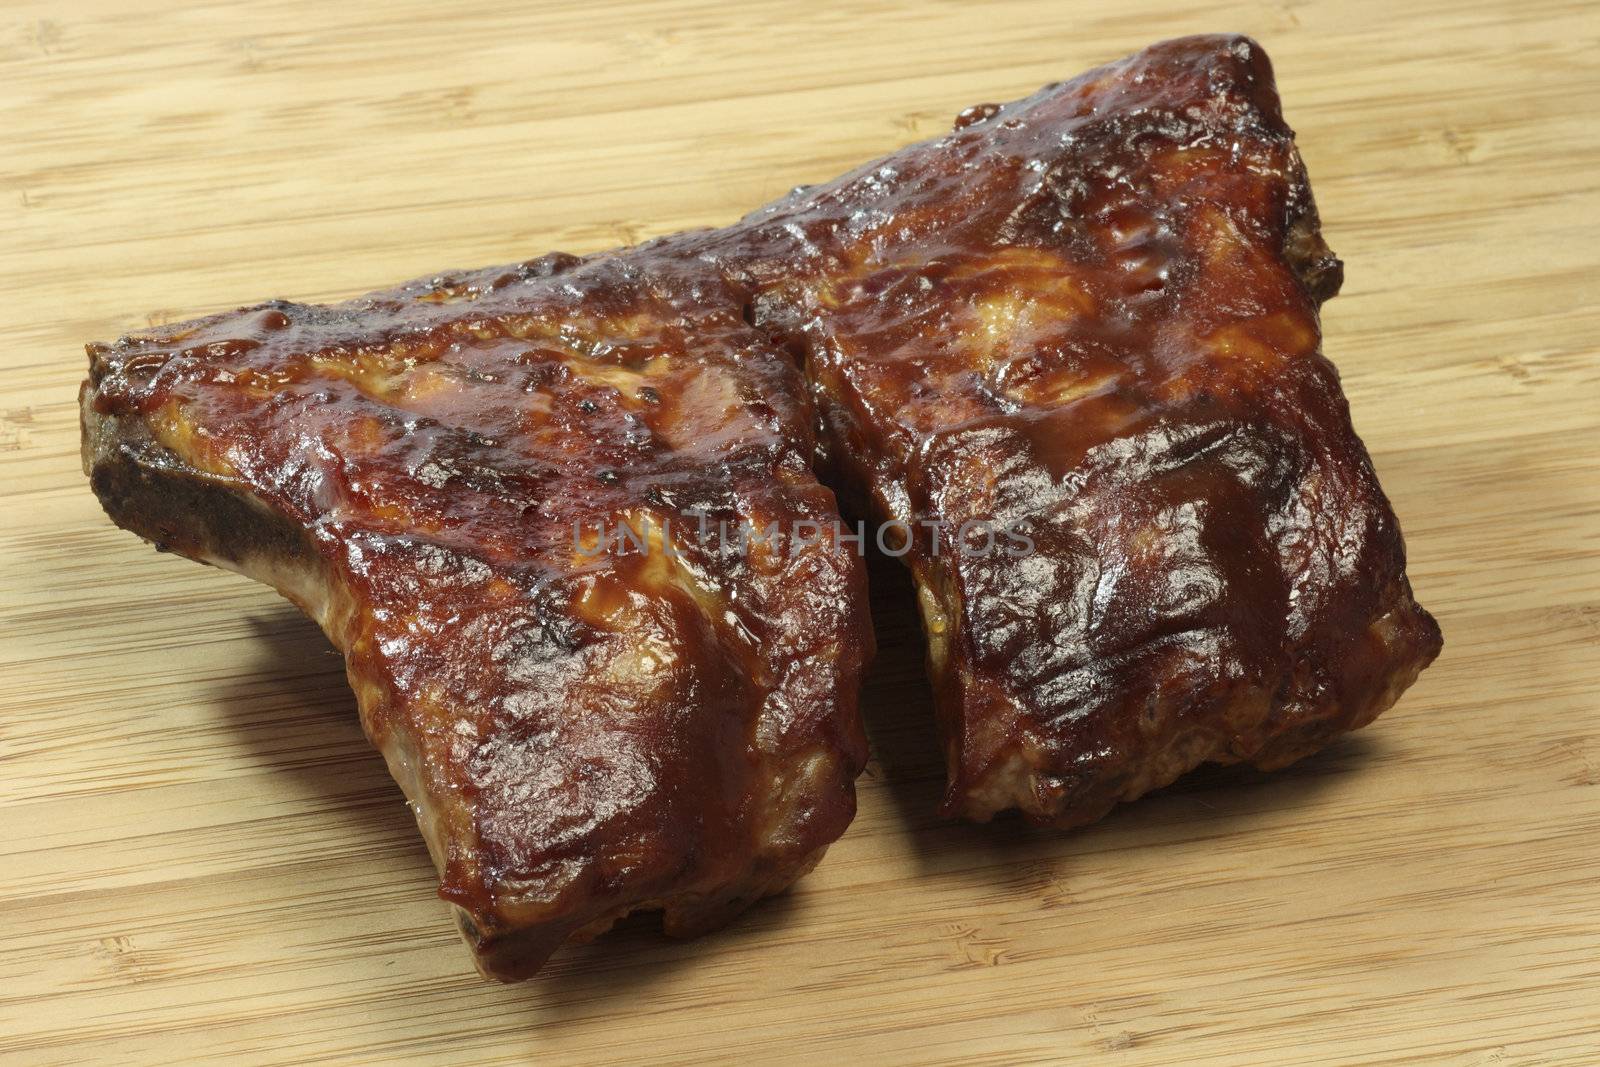 Grilled spare ribs on a wooden plate